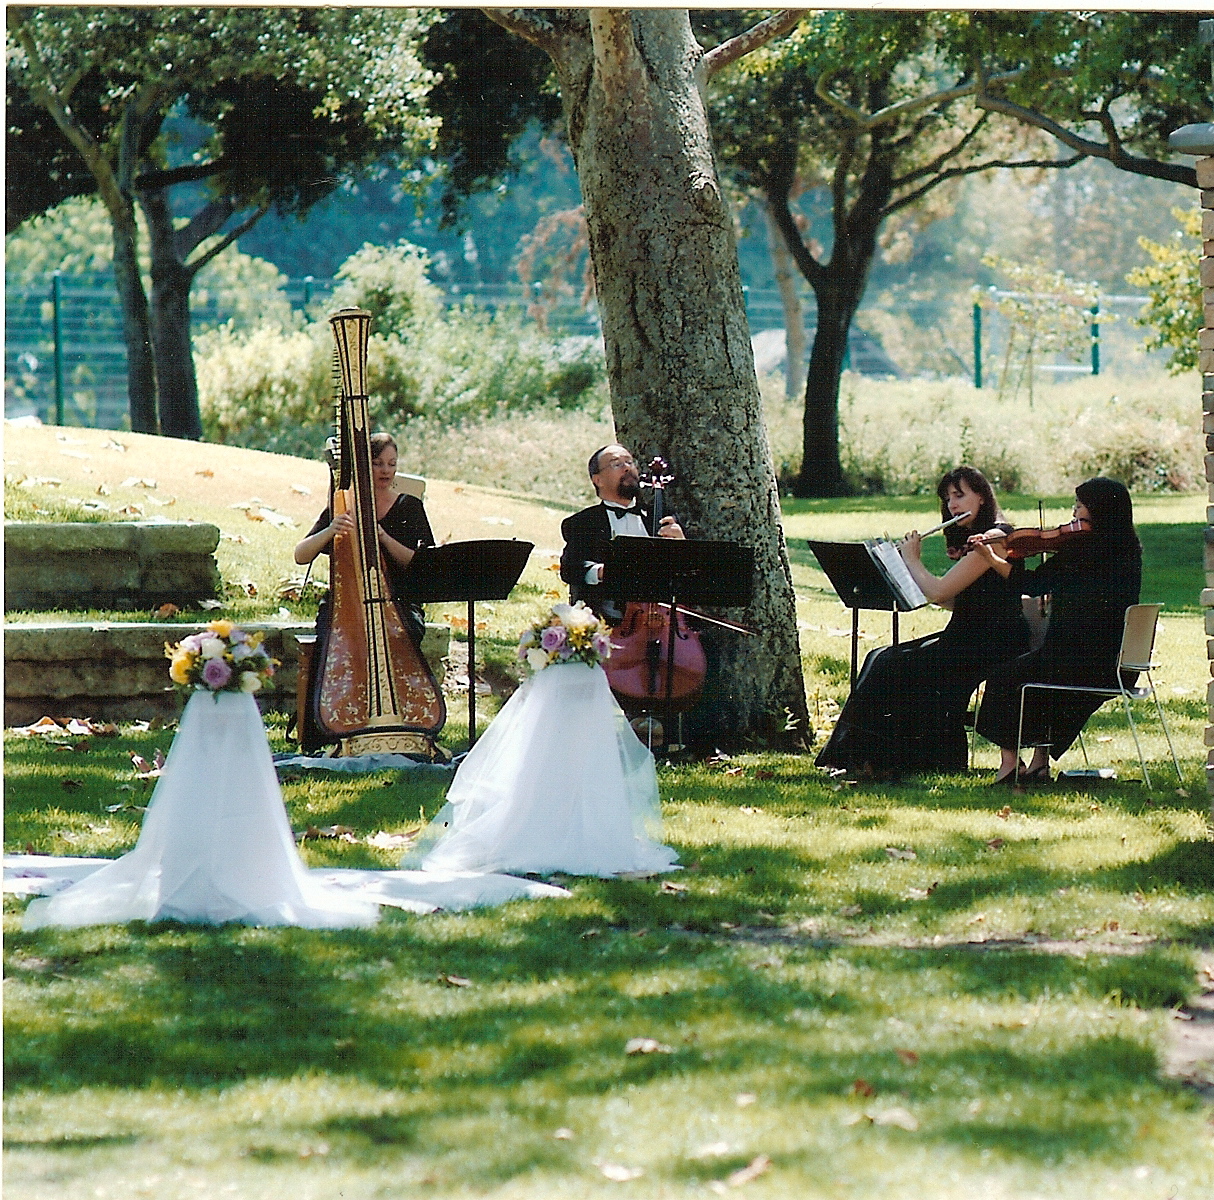 Elegant Music - Live Music and DJ Dance Music for Weddings and Parties in Los Angeles & Southern CA.